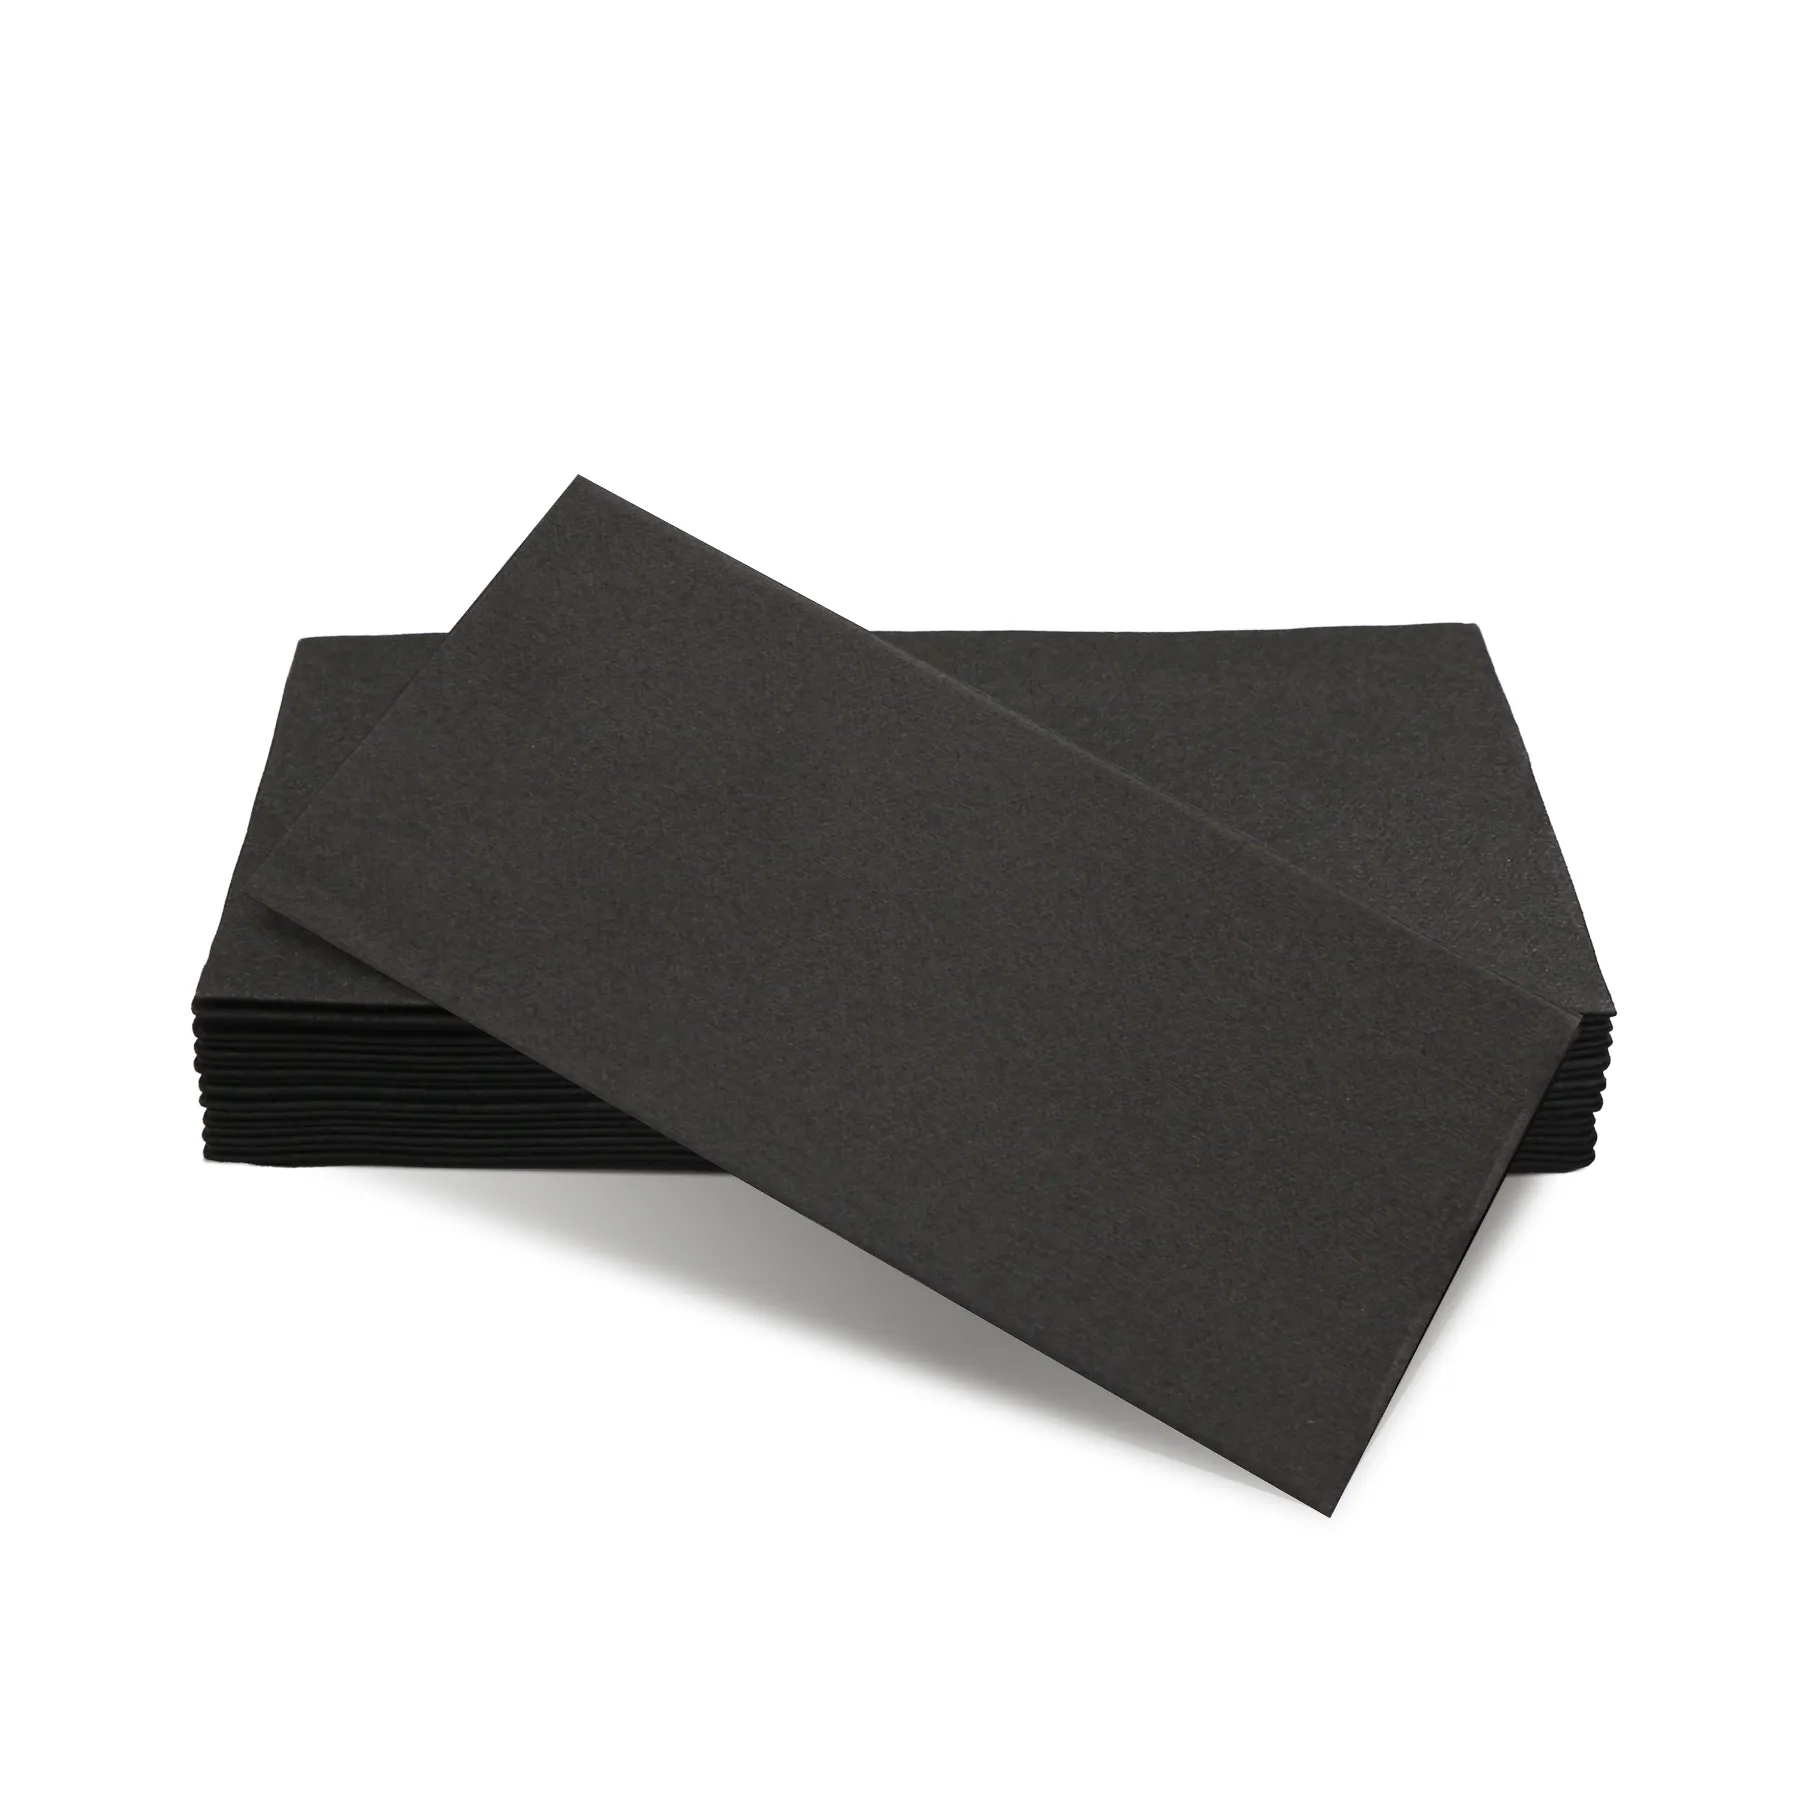 Black Airlaid Napkins With Cutlery Pocket Dinner Napkins Tissue Serviettes Paper for hotel